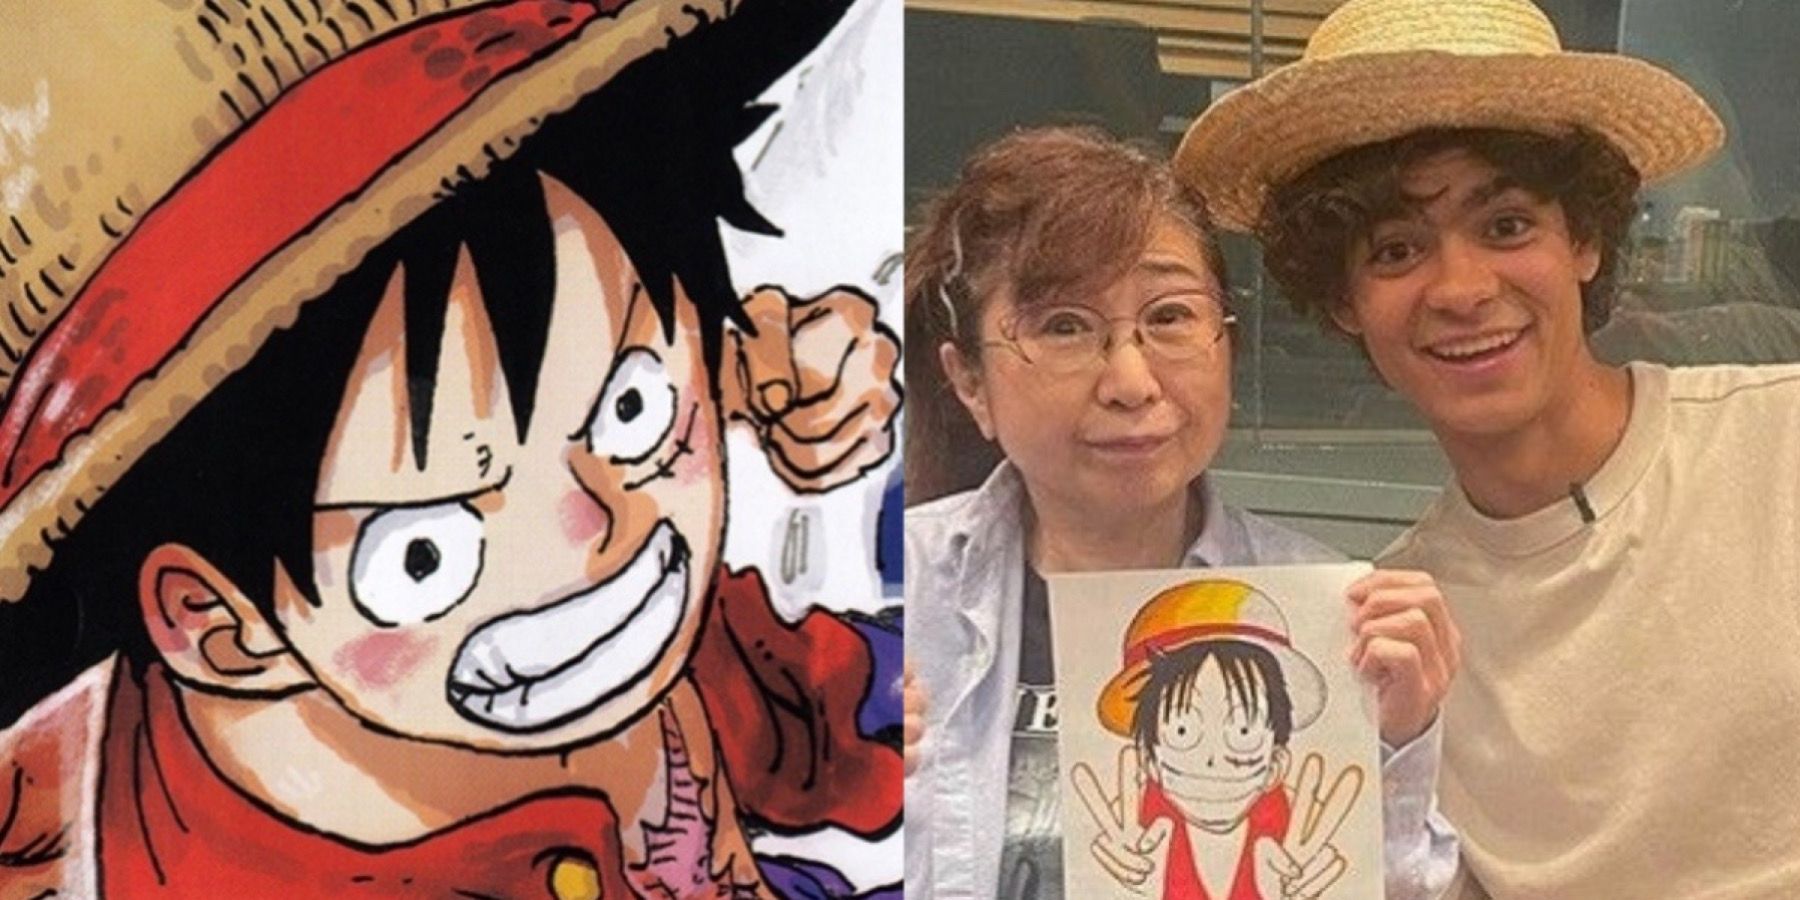 OC] I did some edits of the live action cast. What do you all think? : r/ OnePiece